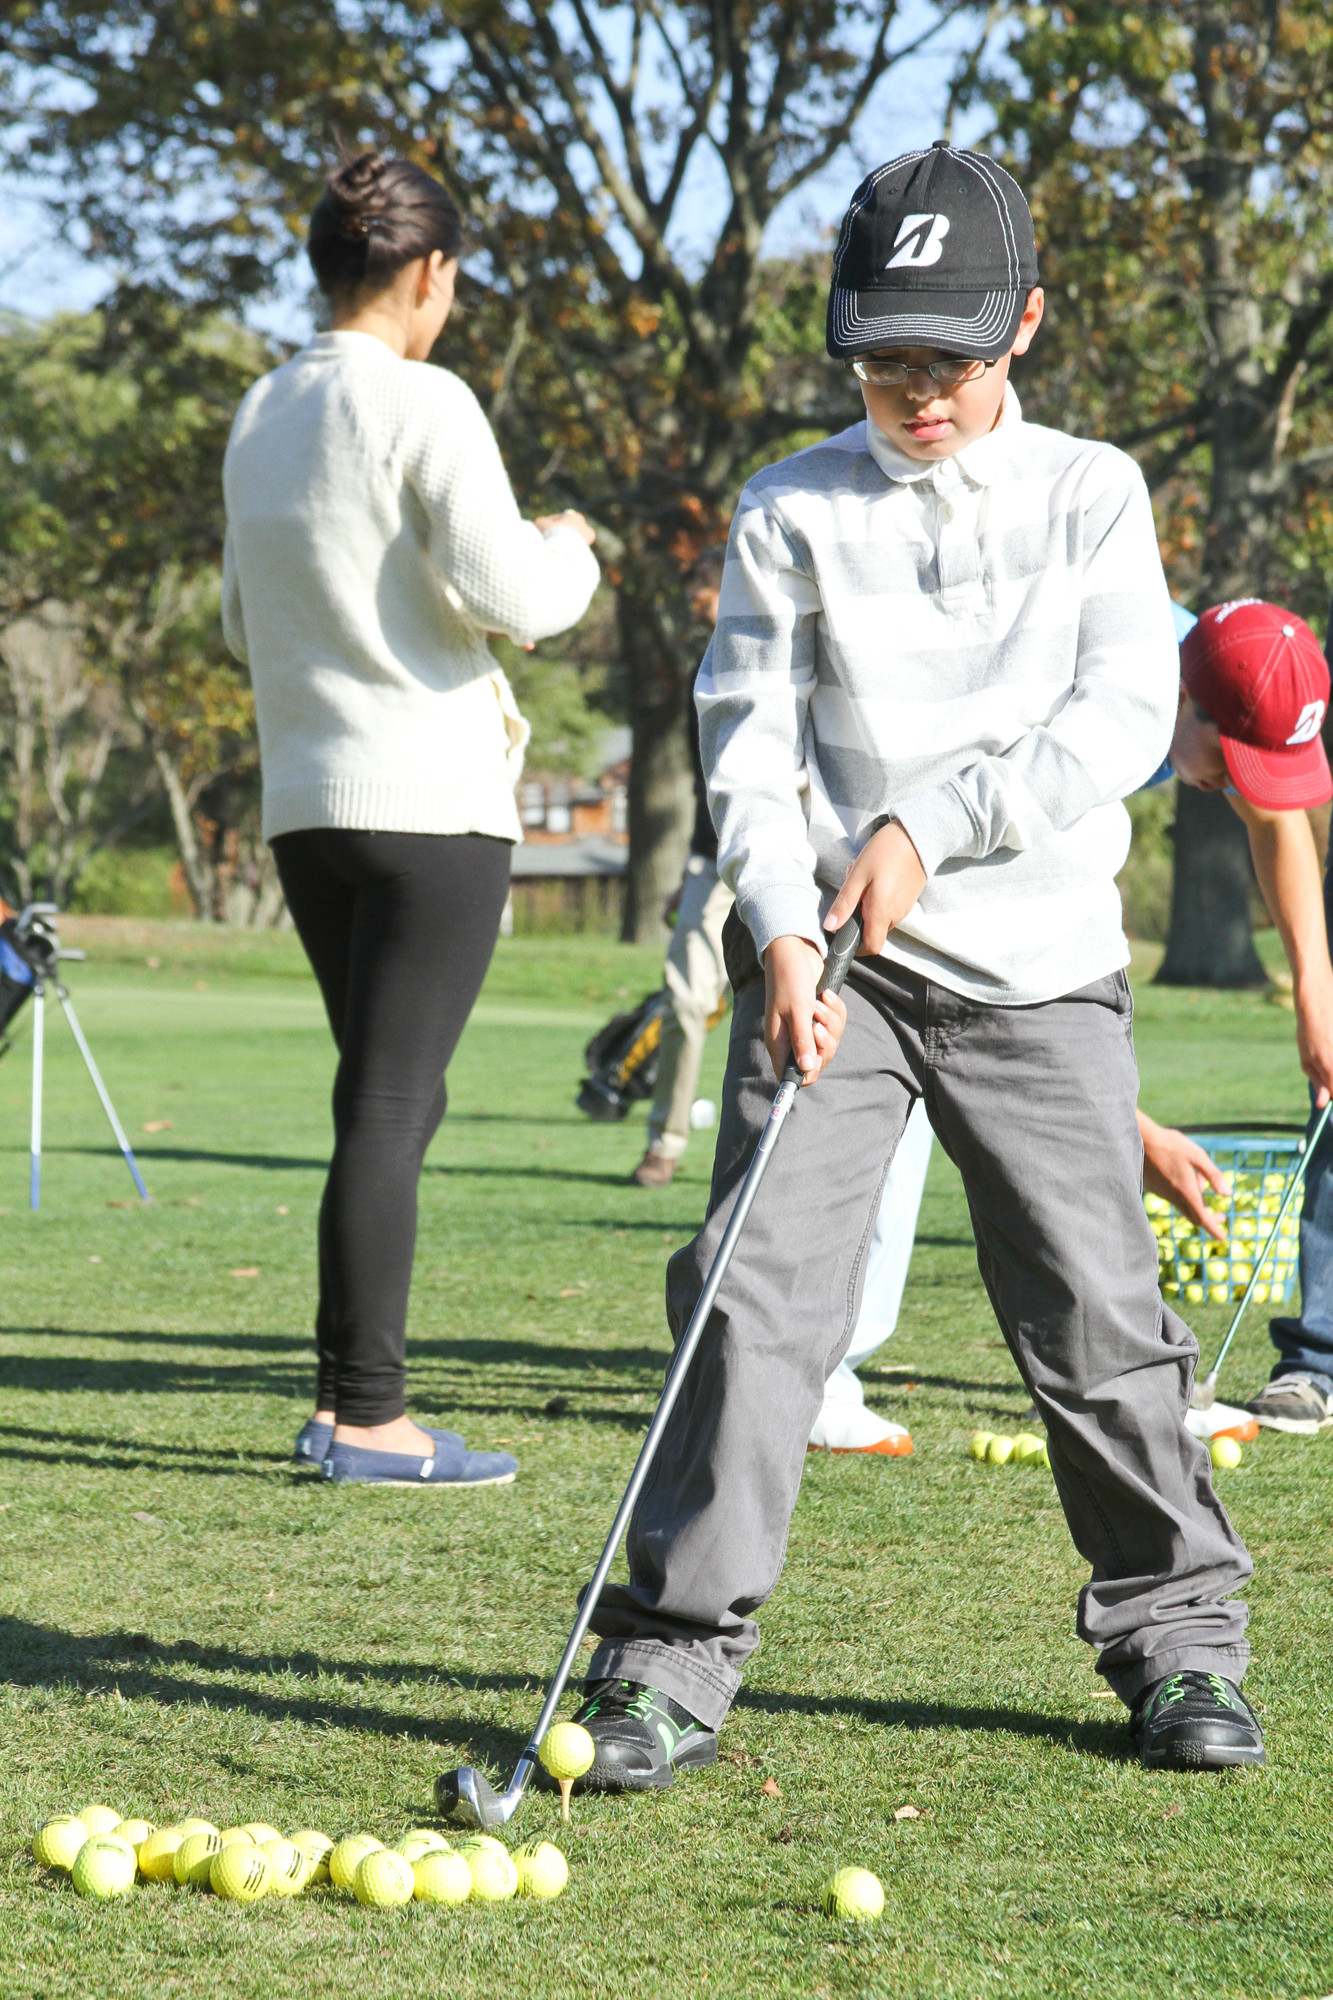 Cristian Cardace, 11, lined up his shot on the Lawrence Yacht & Country Club golf course.